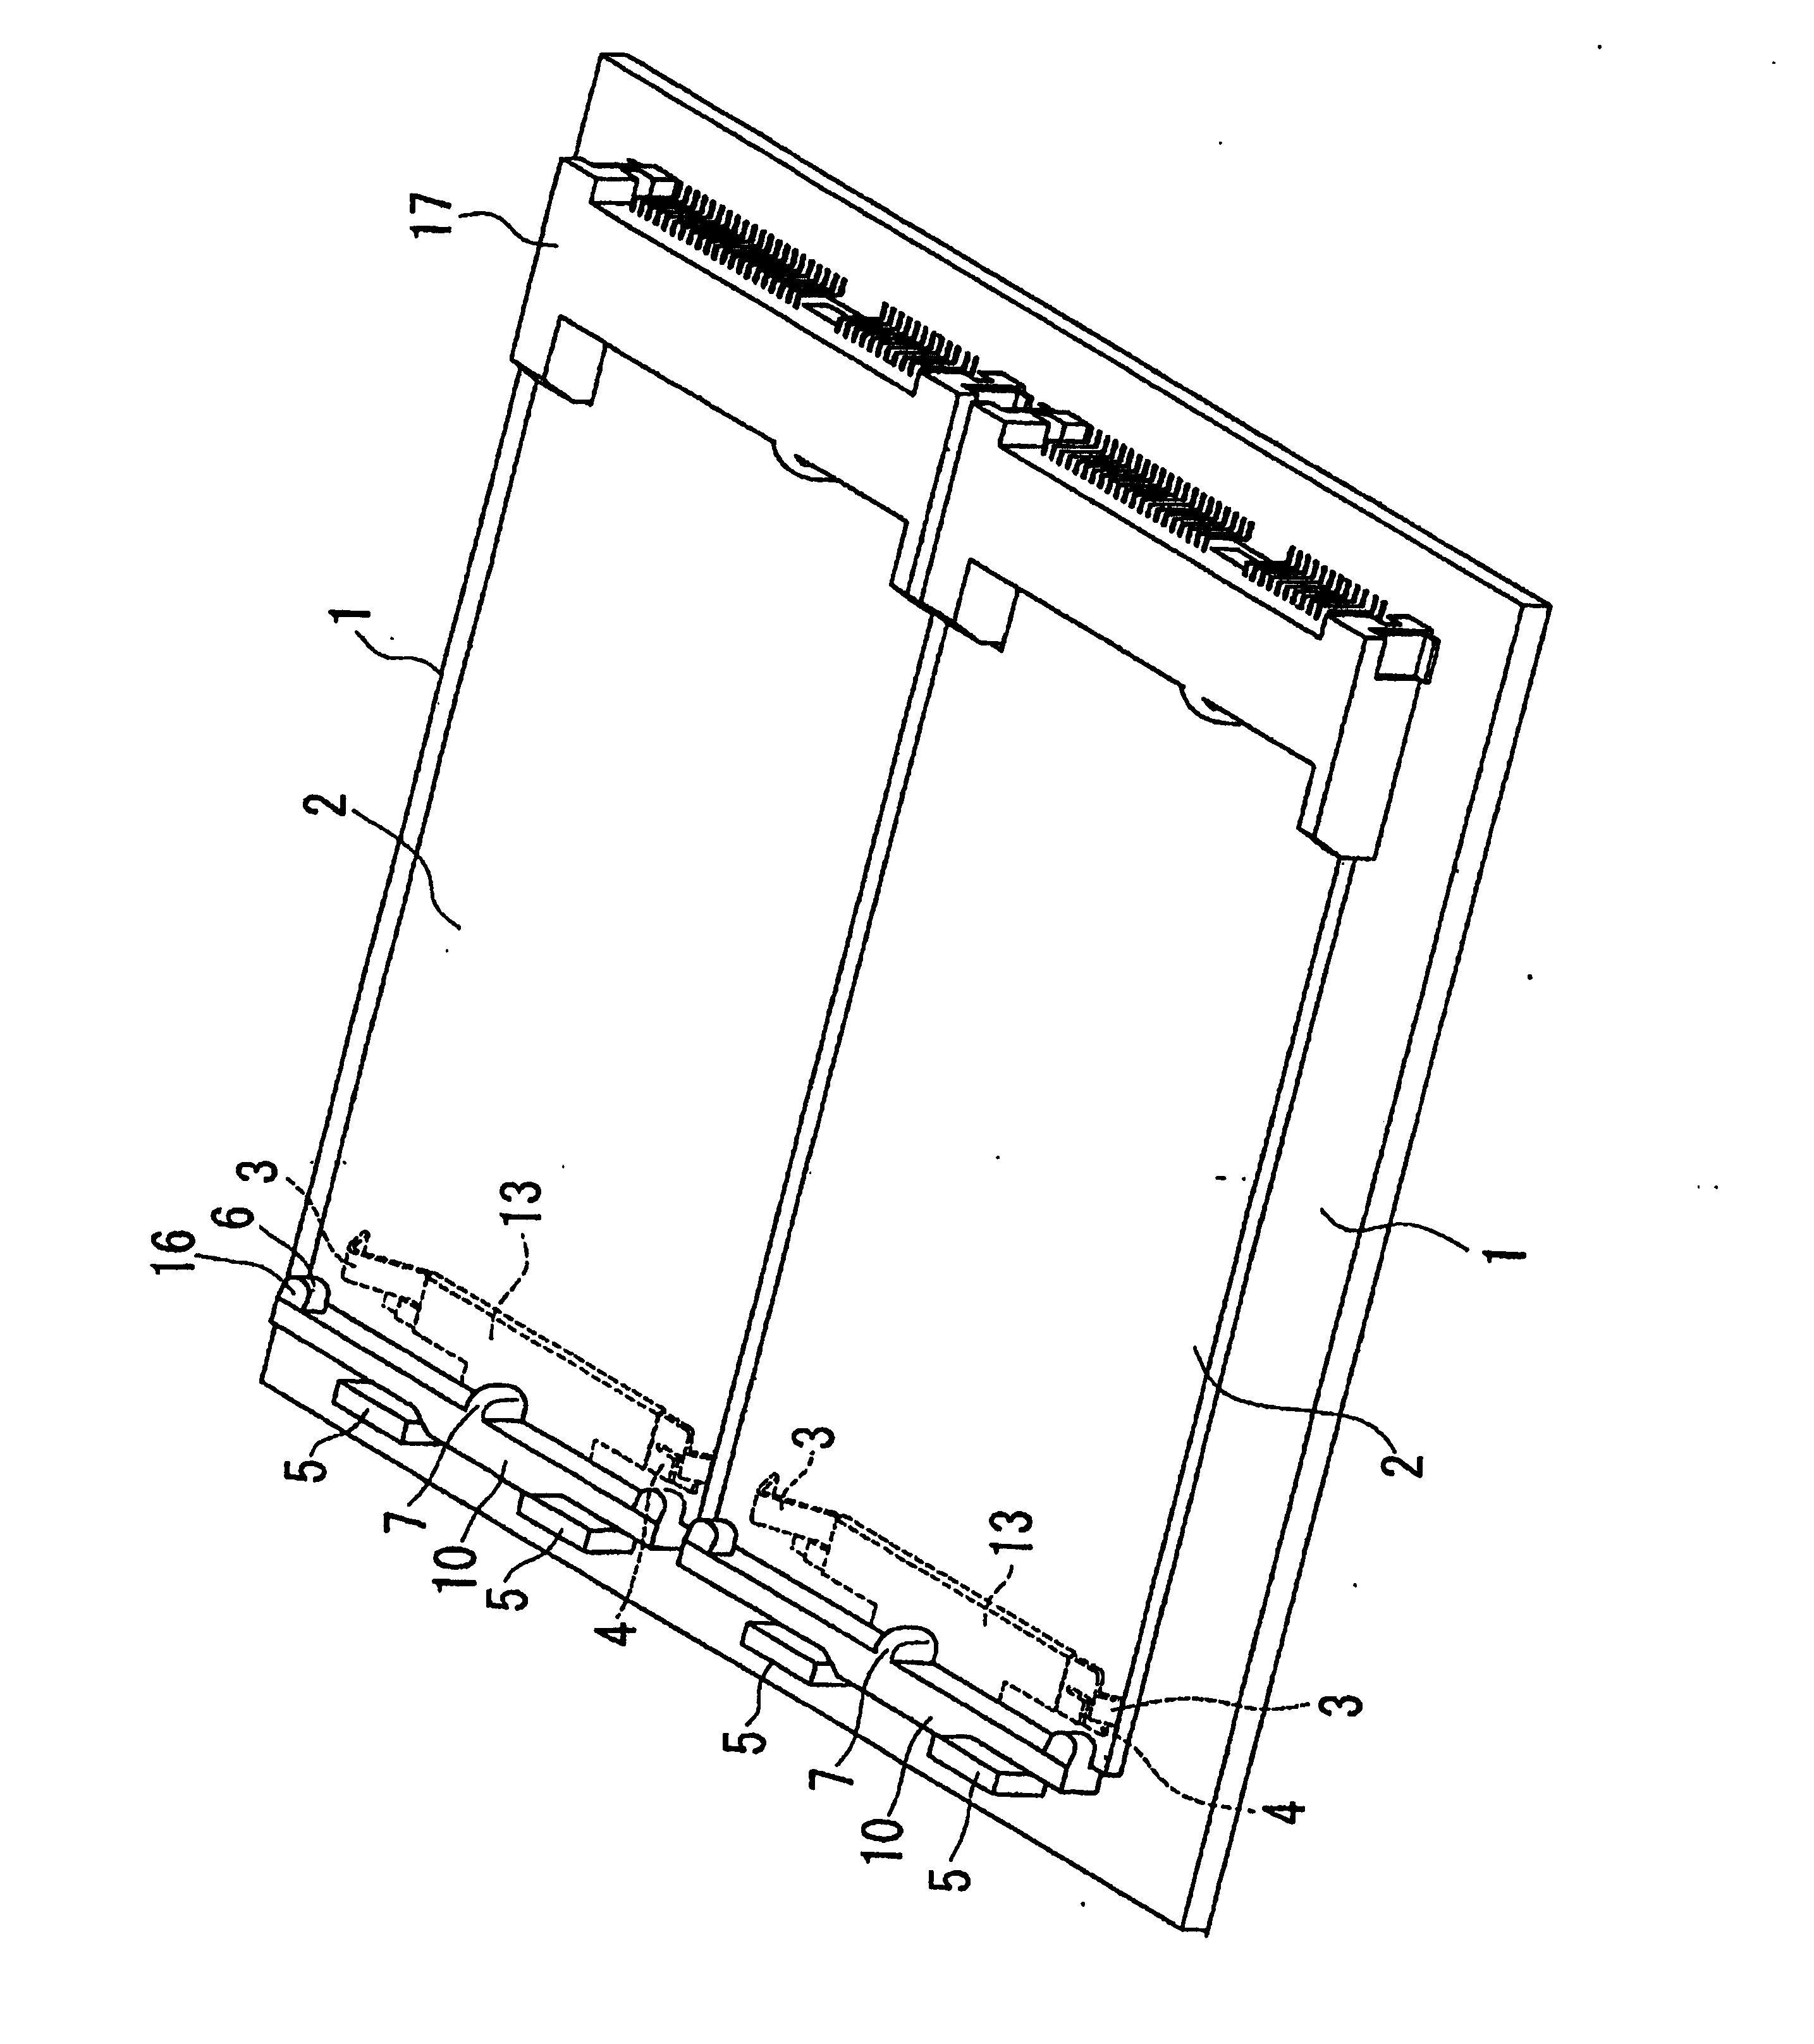 Board securing device